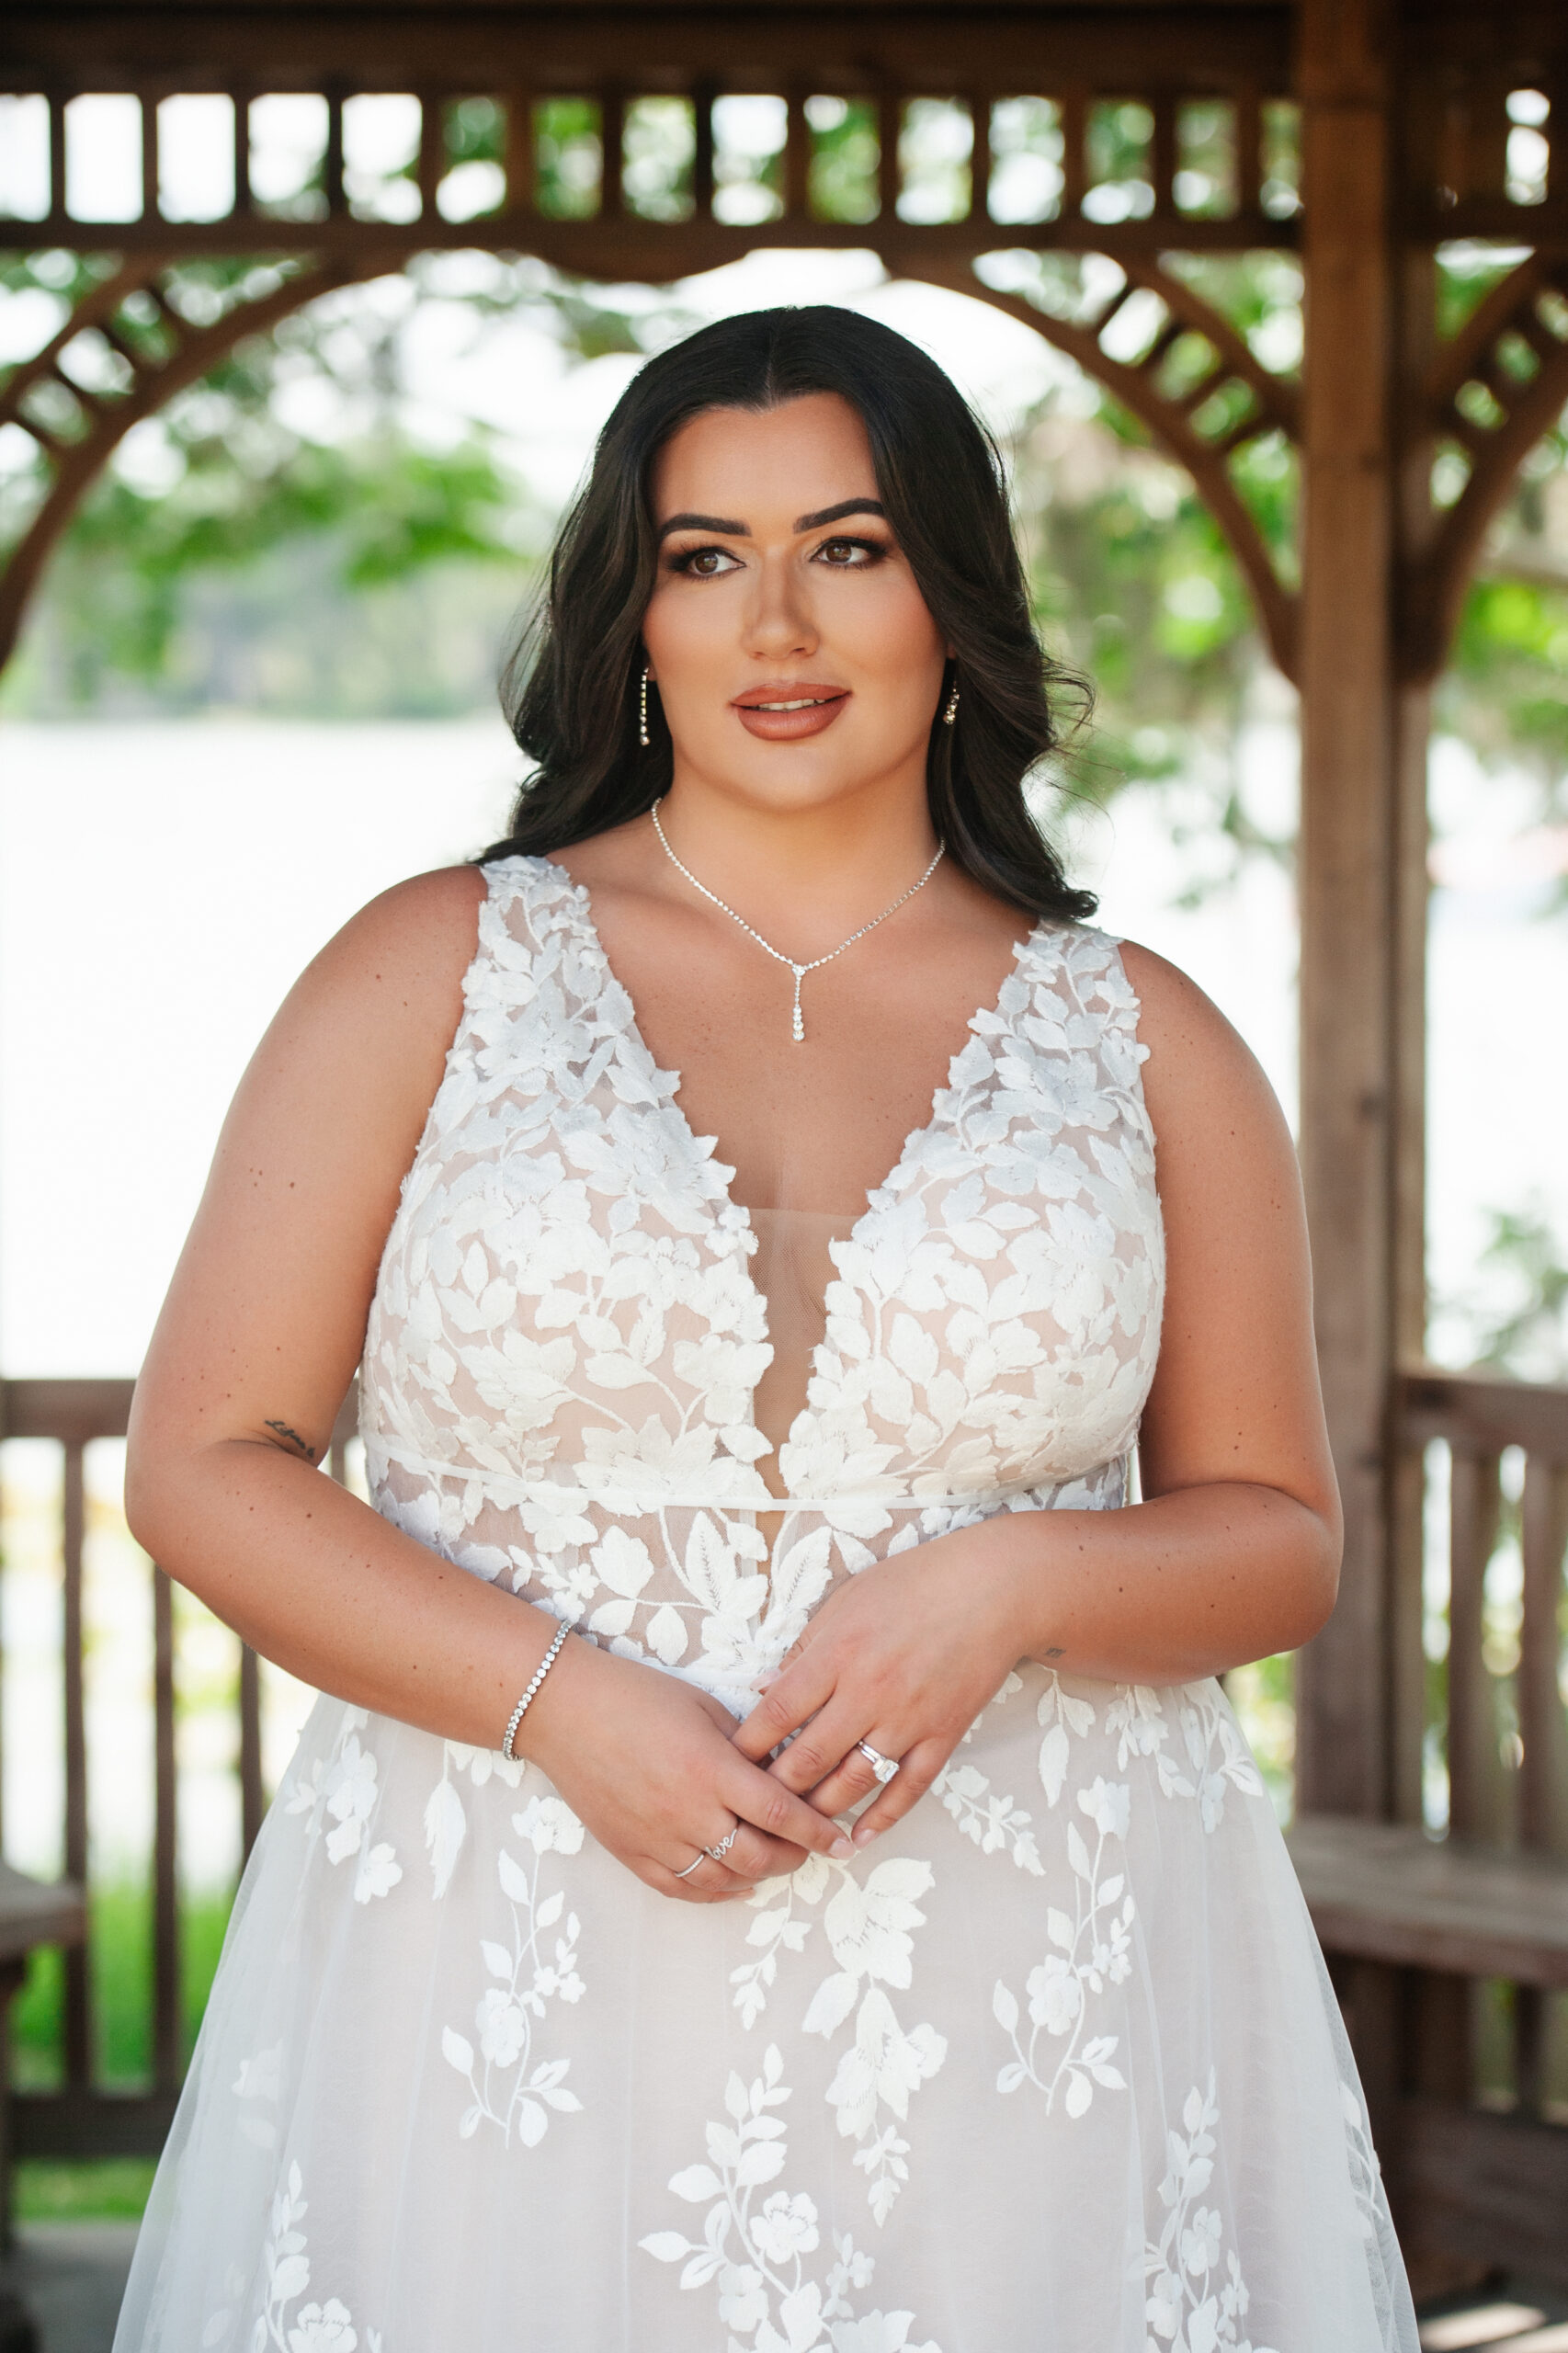 9 MIDSIZE BRIDAL OUTFITS TRY-ON  finding a white dress for my